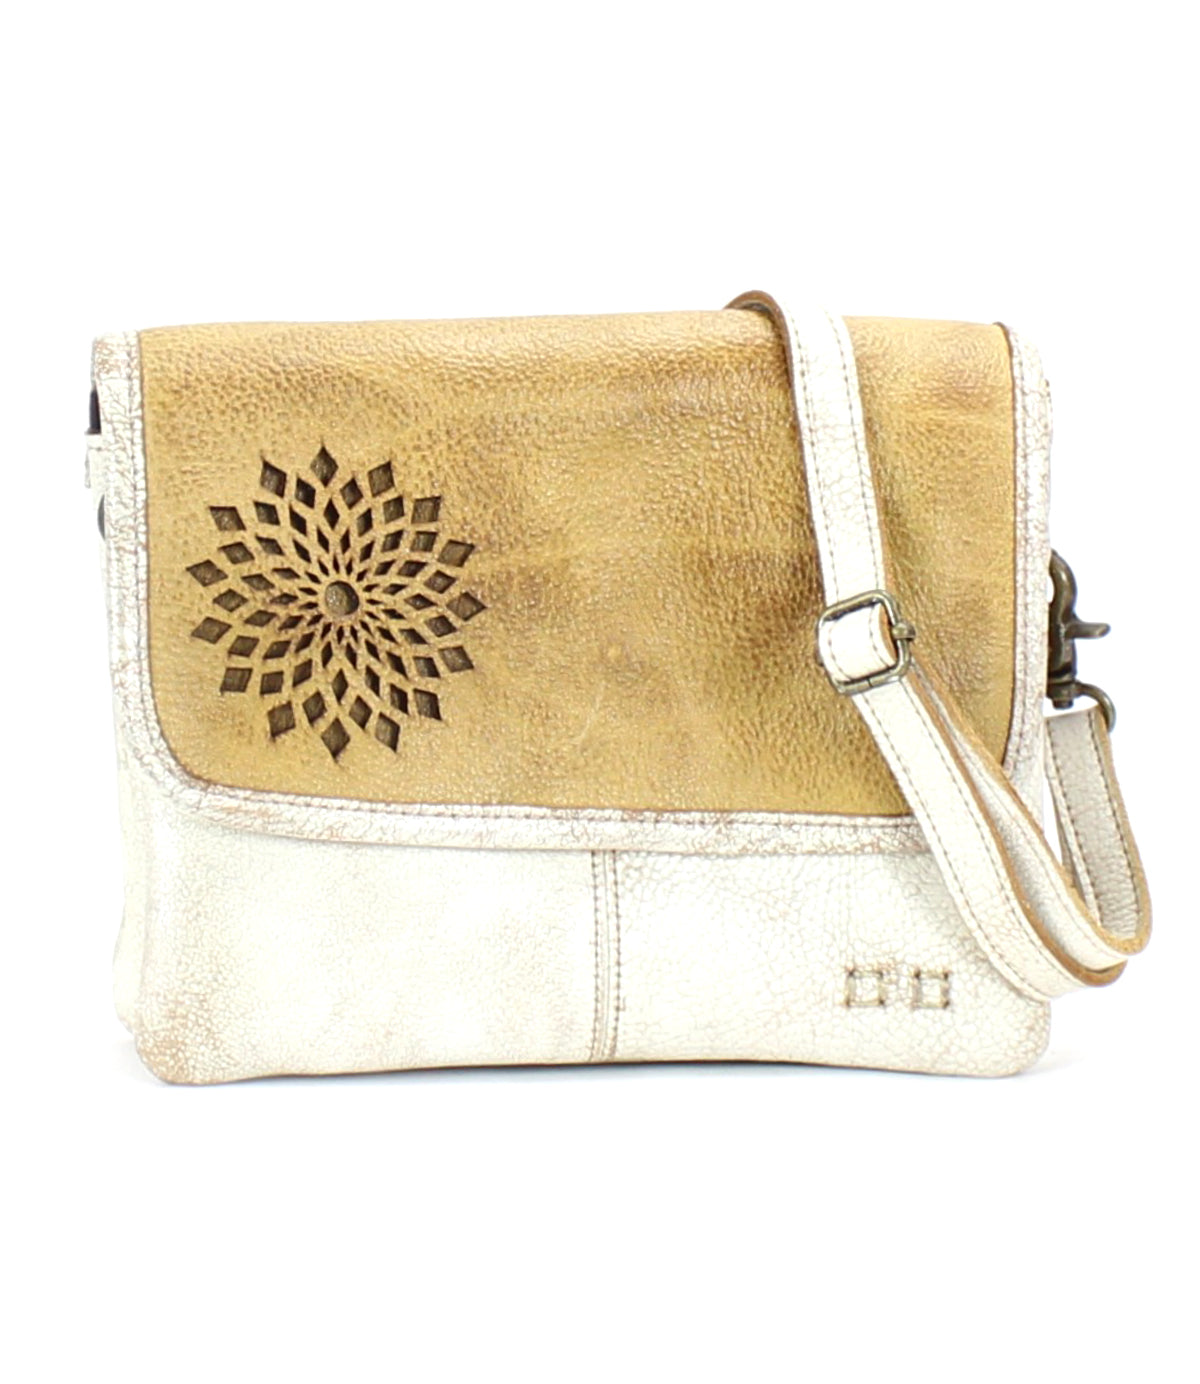 A stylish accessory, the Bed Stu Ziggy II leather bag features a flower design and compartments.